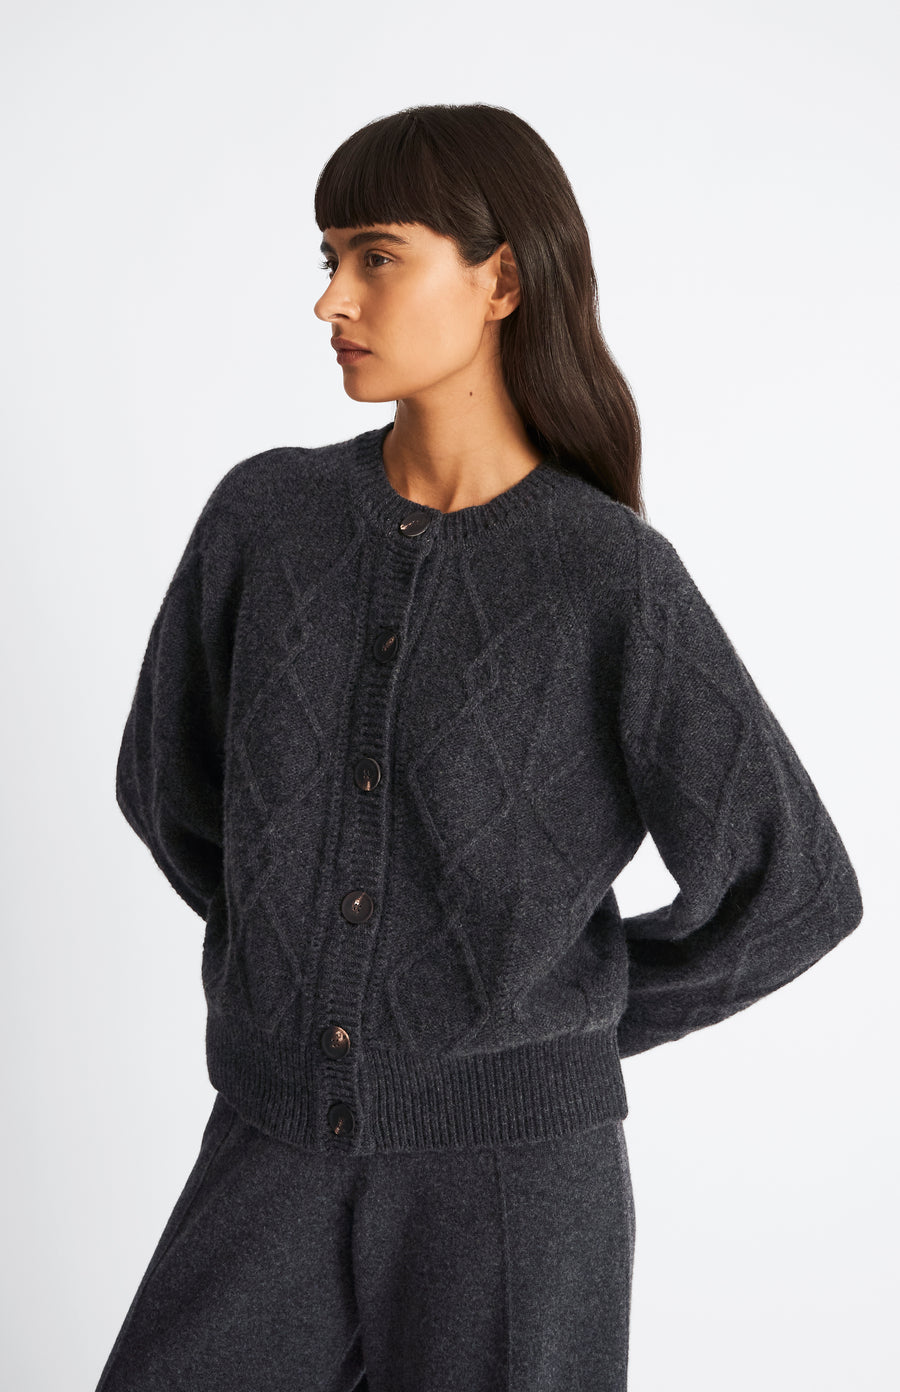 Pringle of Scotland Multi Texture Cashmere blend cardigan in Charcoal on model